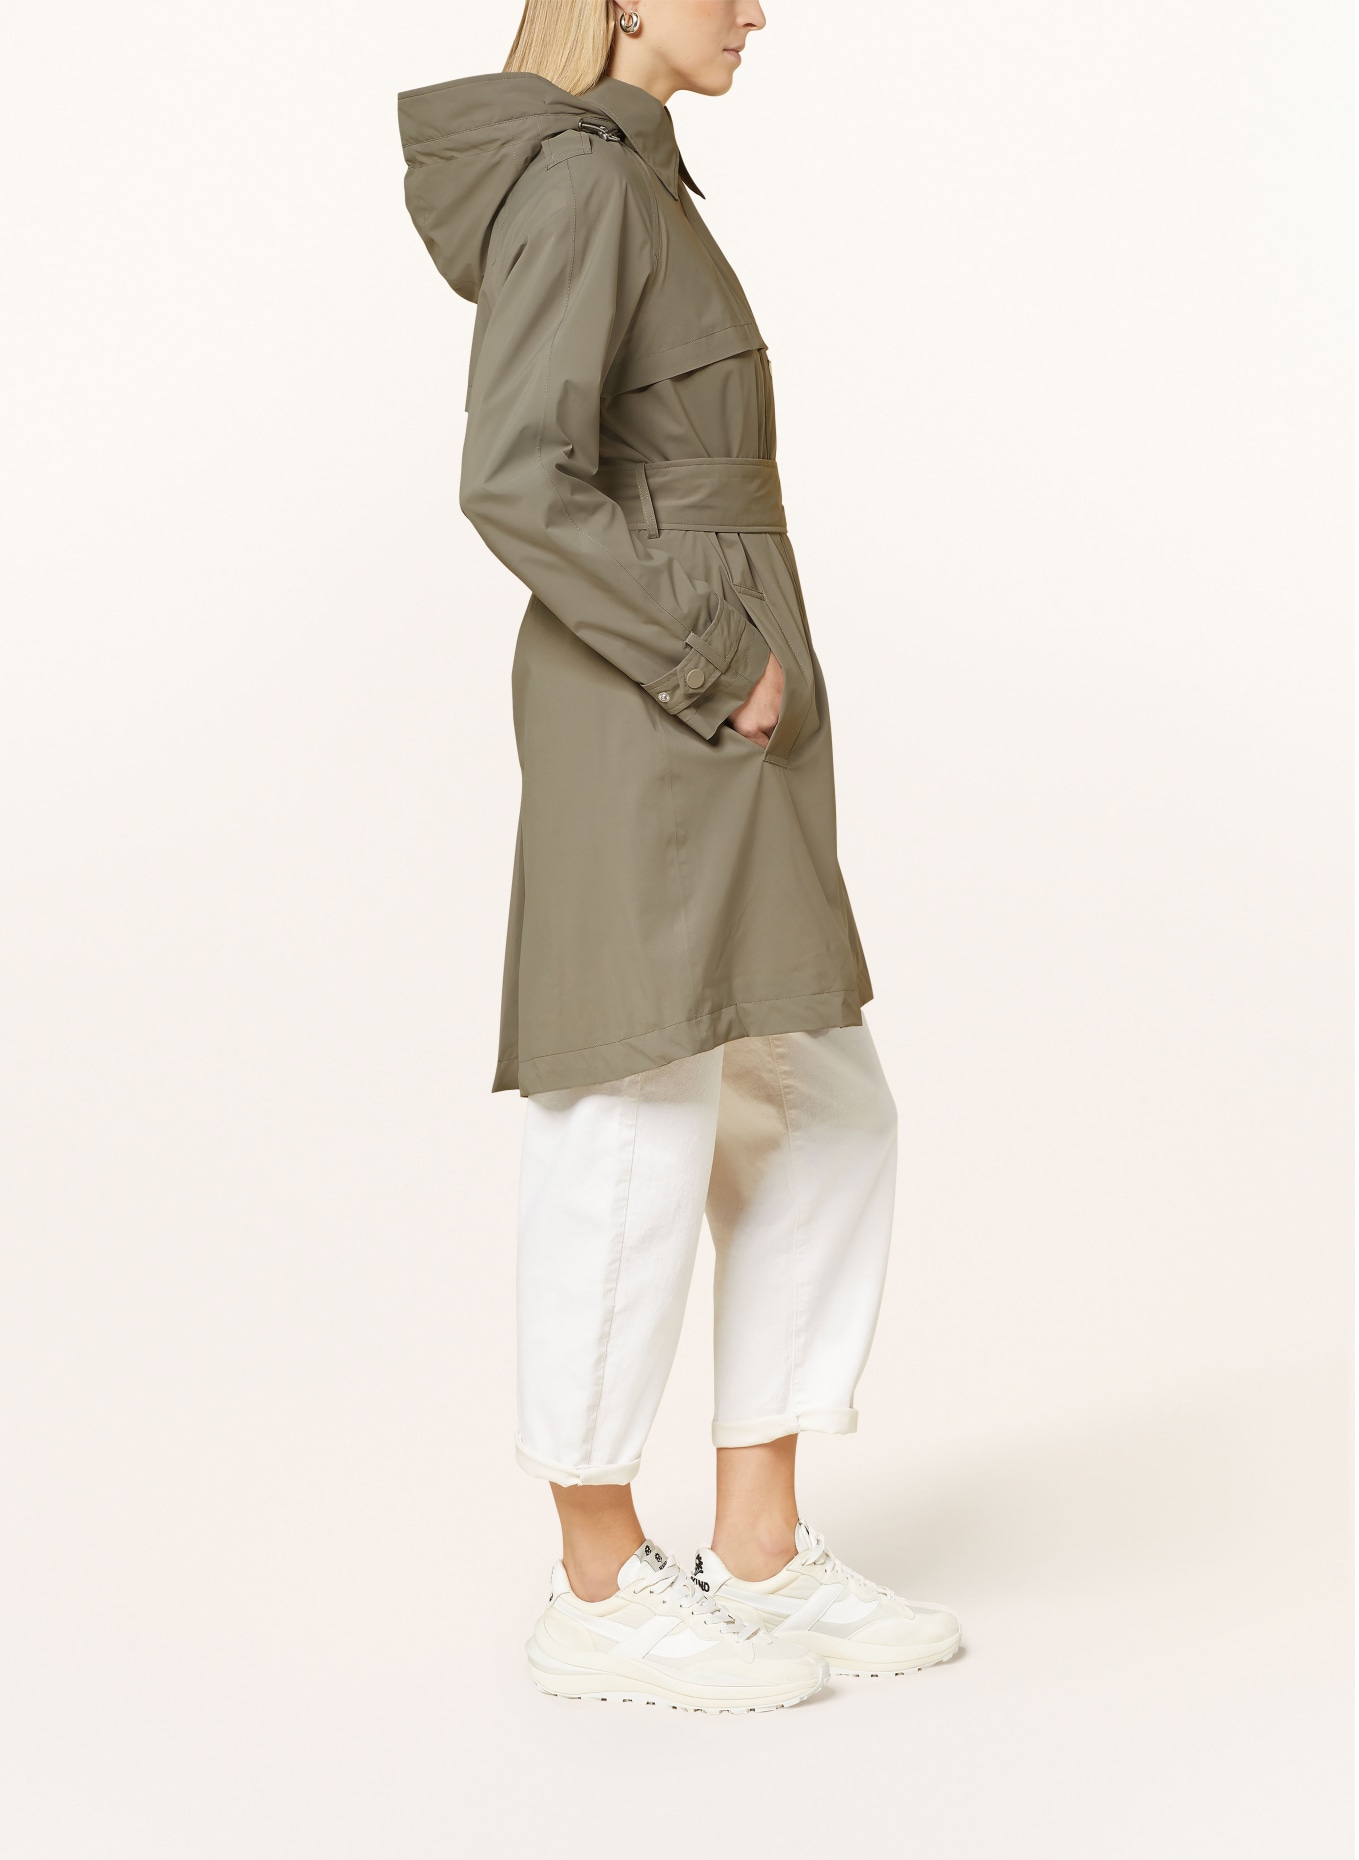 BEAUMONT Trench coat BRINKLEY with detachable hood, Color: KHAKI (Image 4)